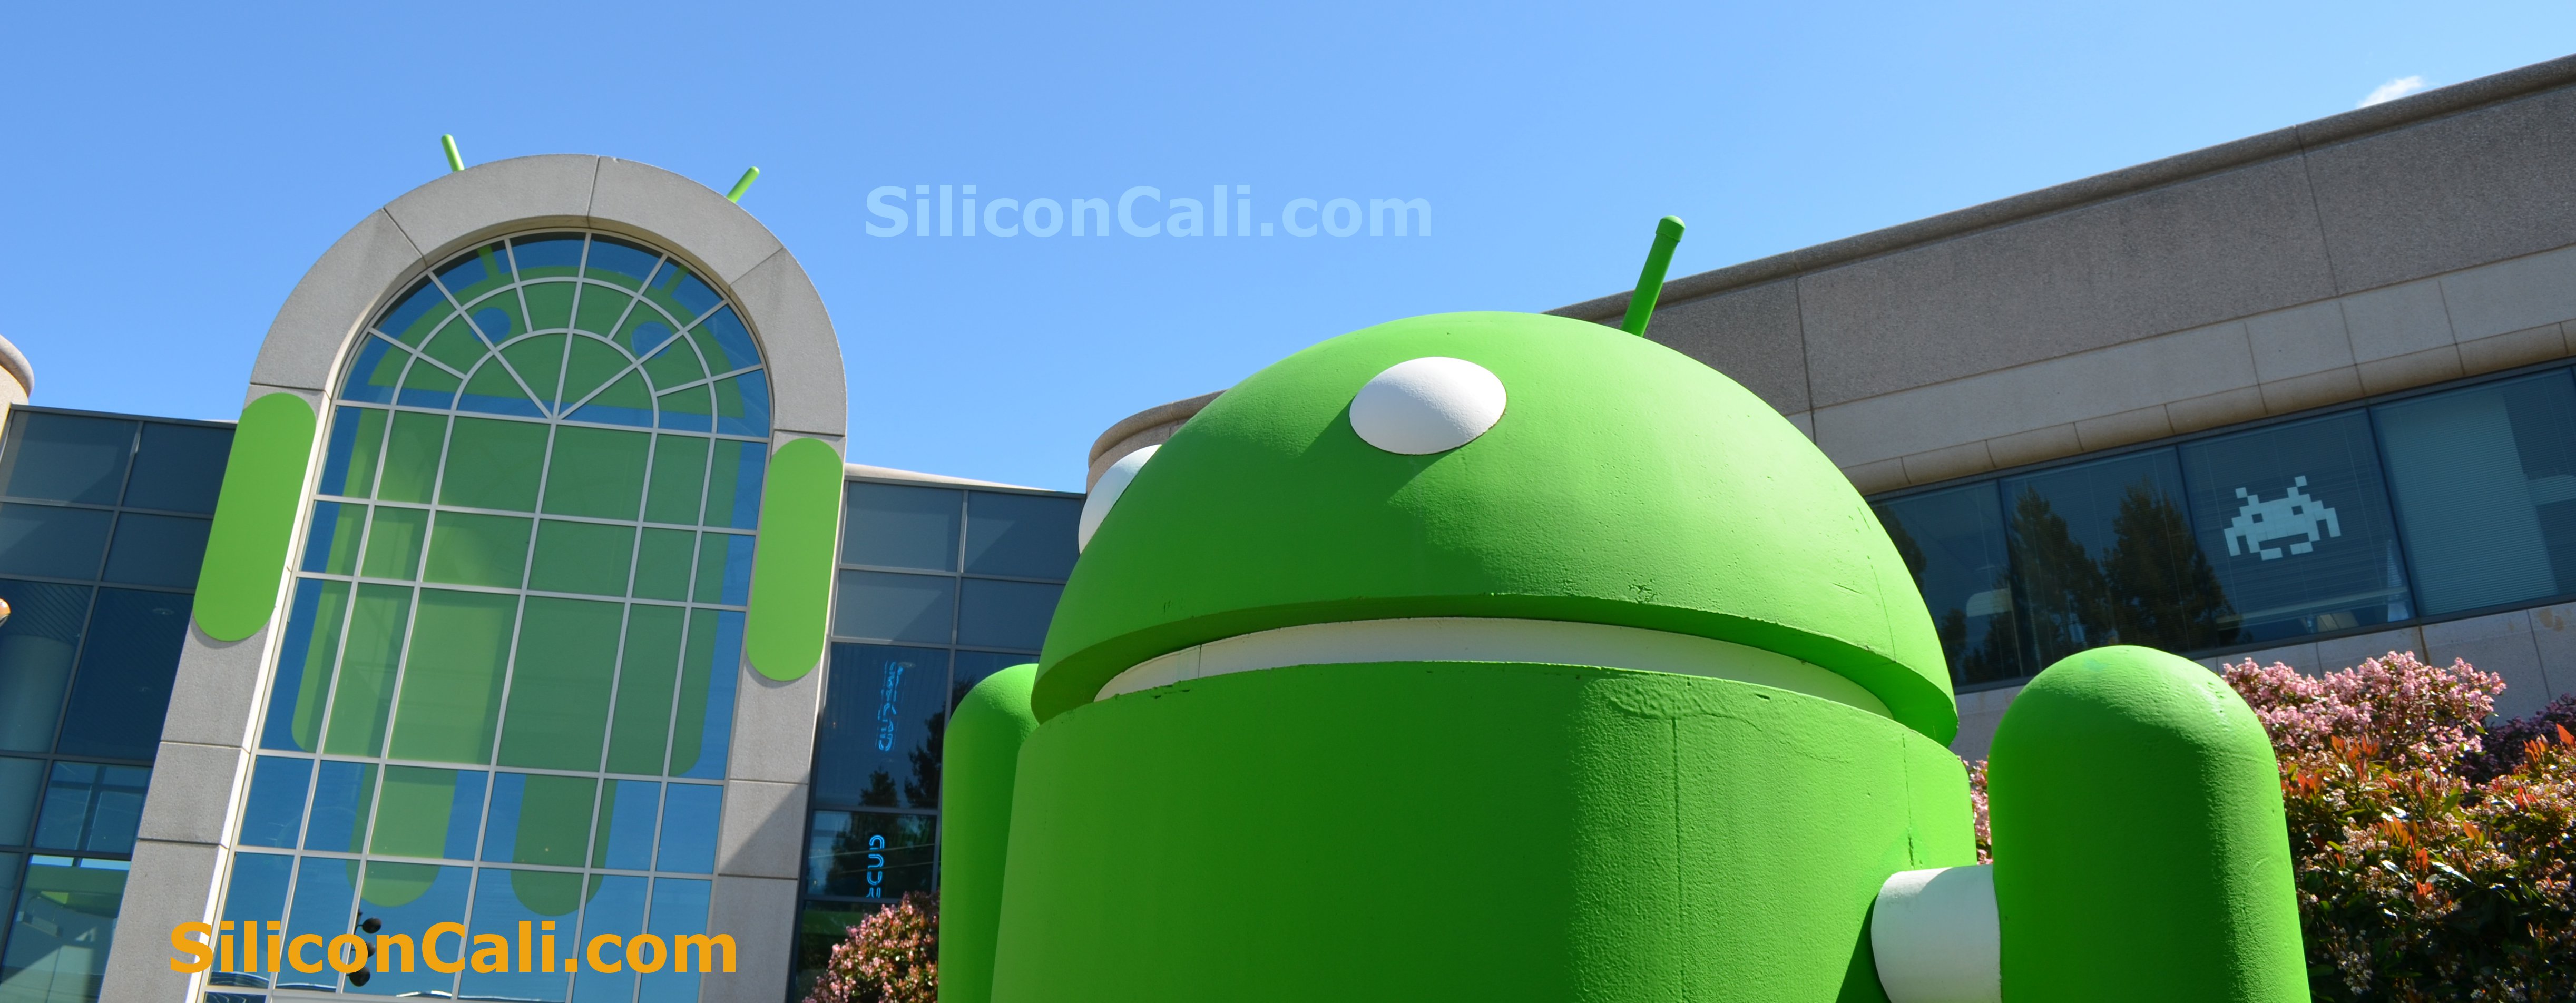 Giant-Android-Statue-Google-SiliconCali.com_featured